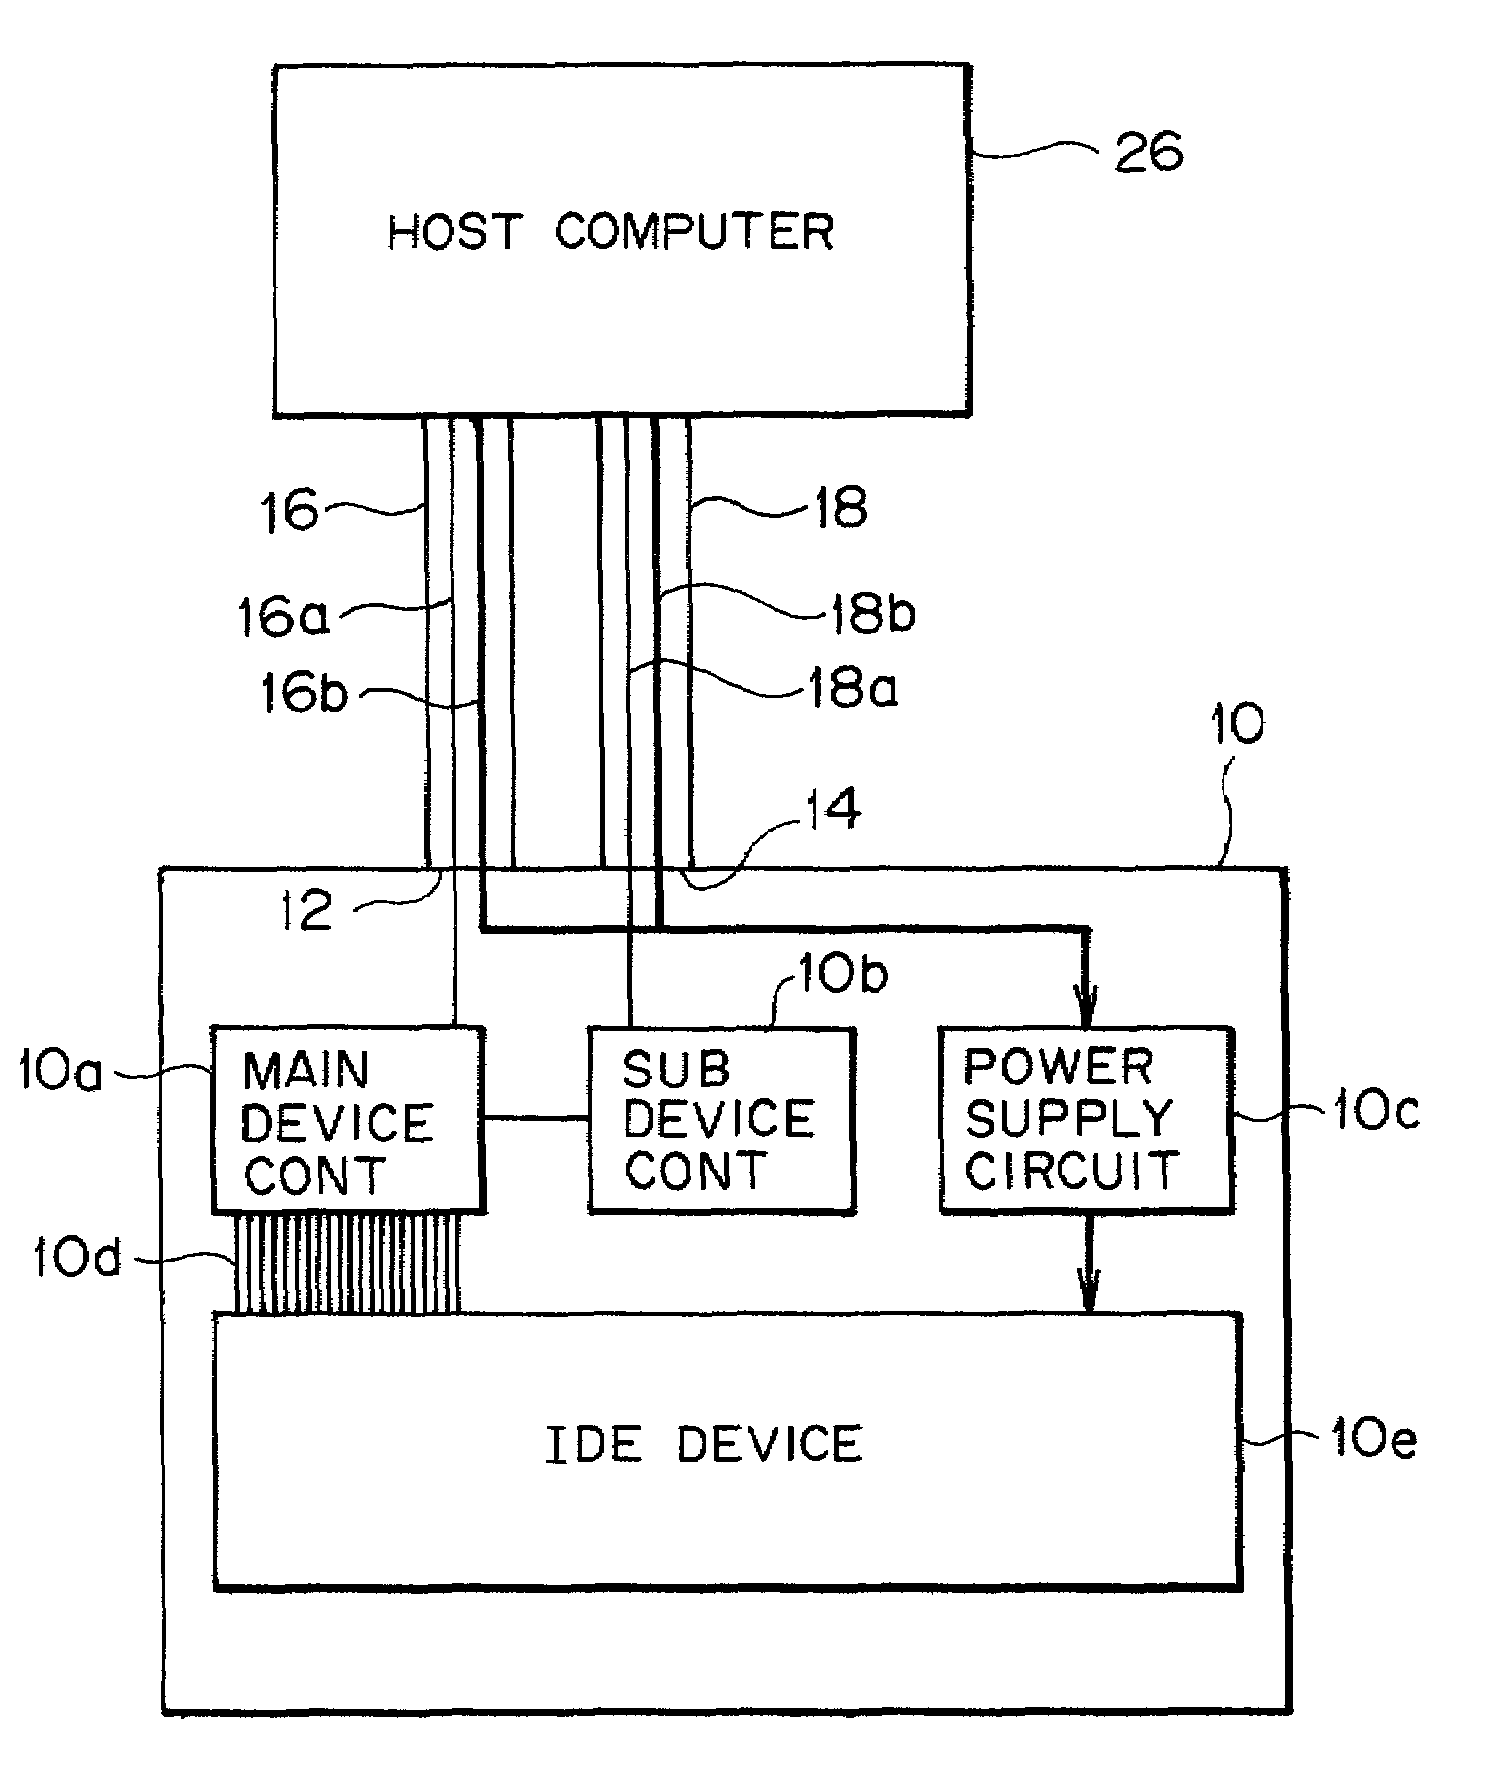 Electronic device with plural interface ports wherein one of the interface ports is used as an assist power supply port